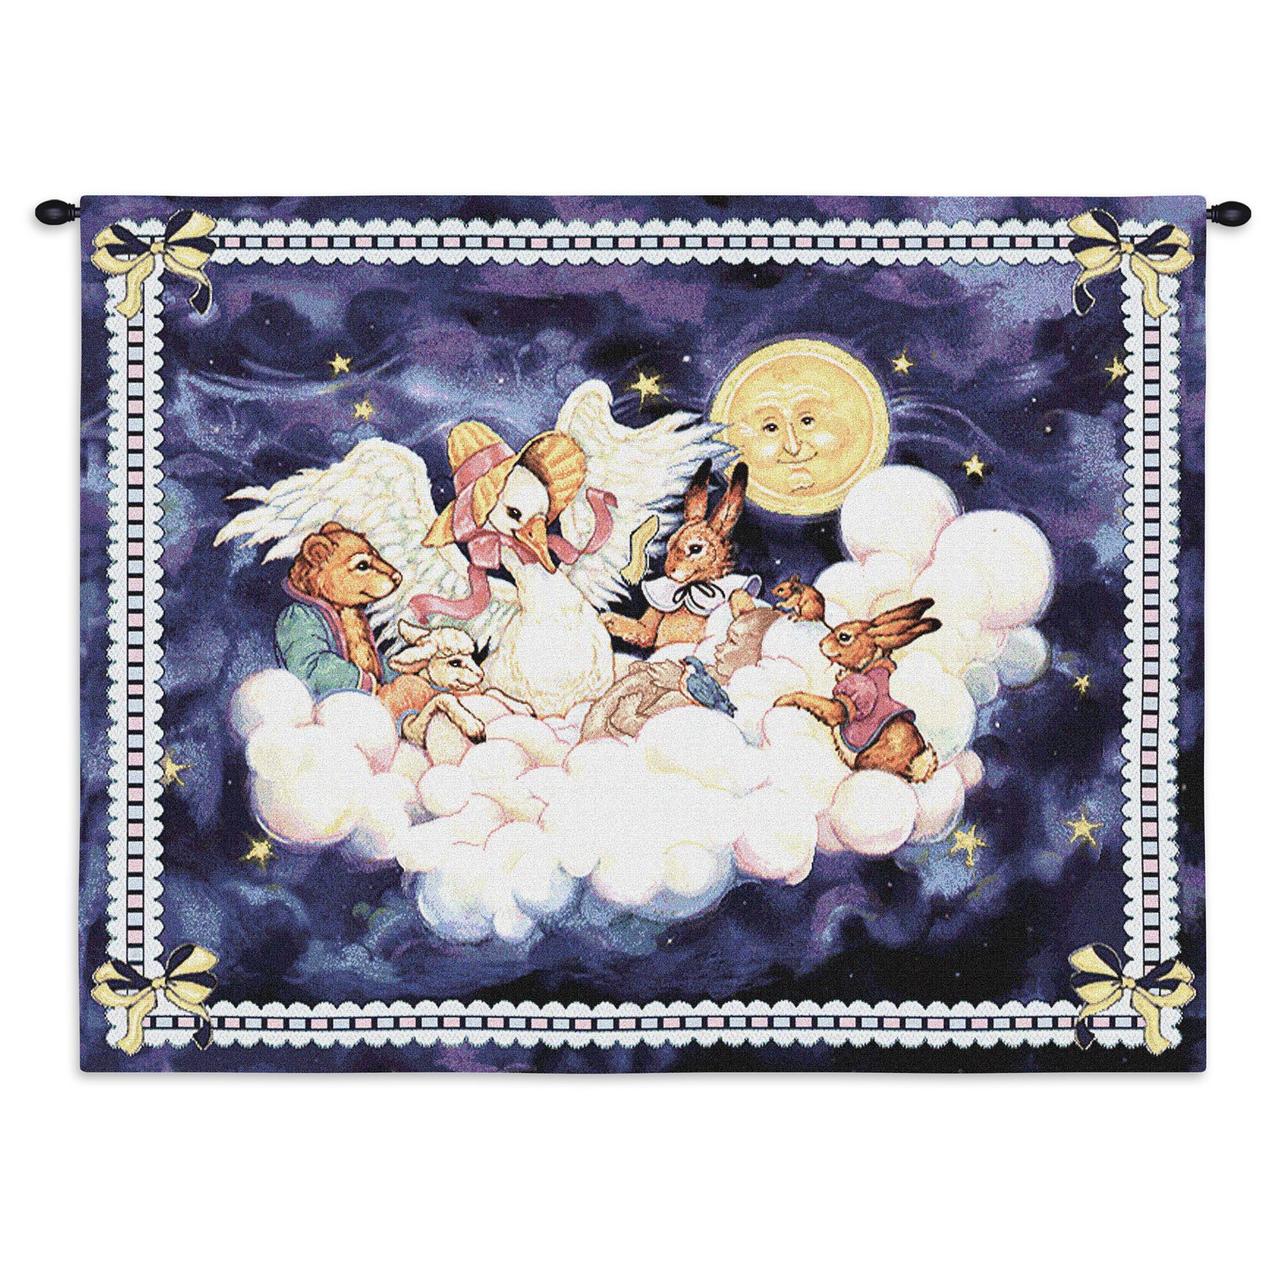 Mother Goose By Donna Race Woven Tapestry Wall Art Hanging Cotton USA Size 33x26 